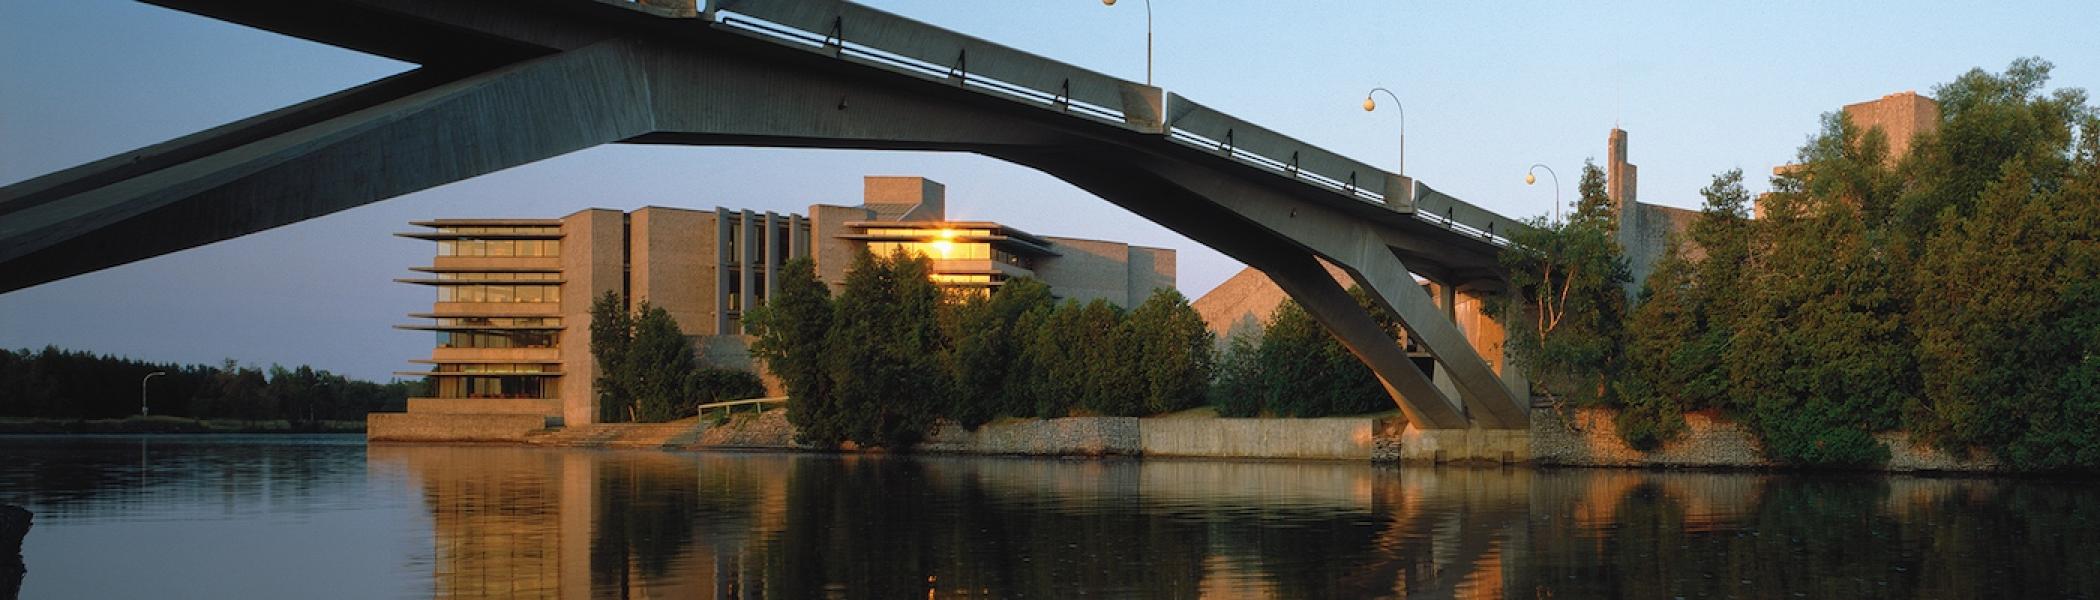 View of the Bata Library and the Bridge from East Bank Trent University